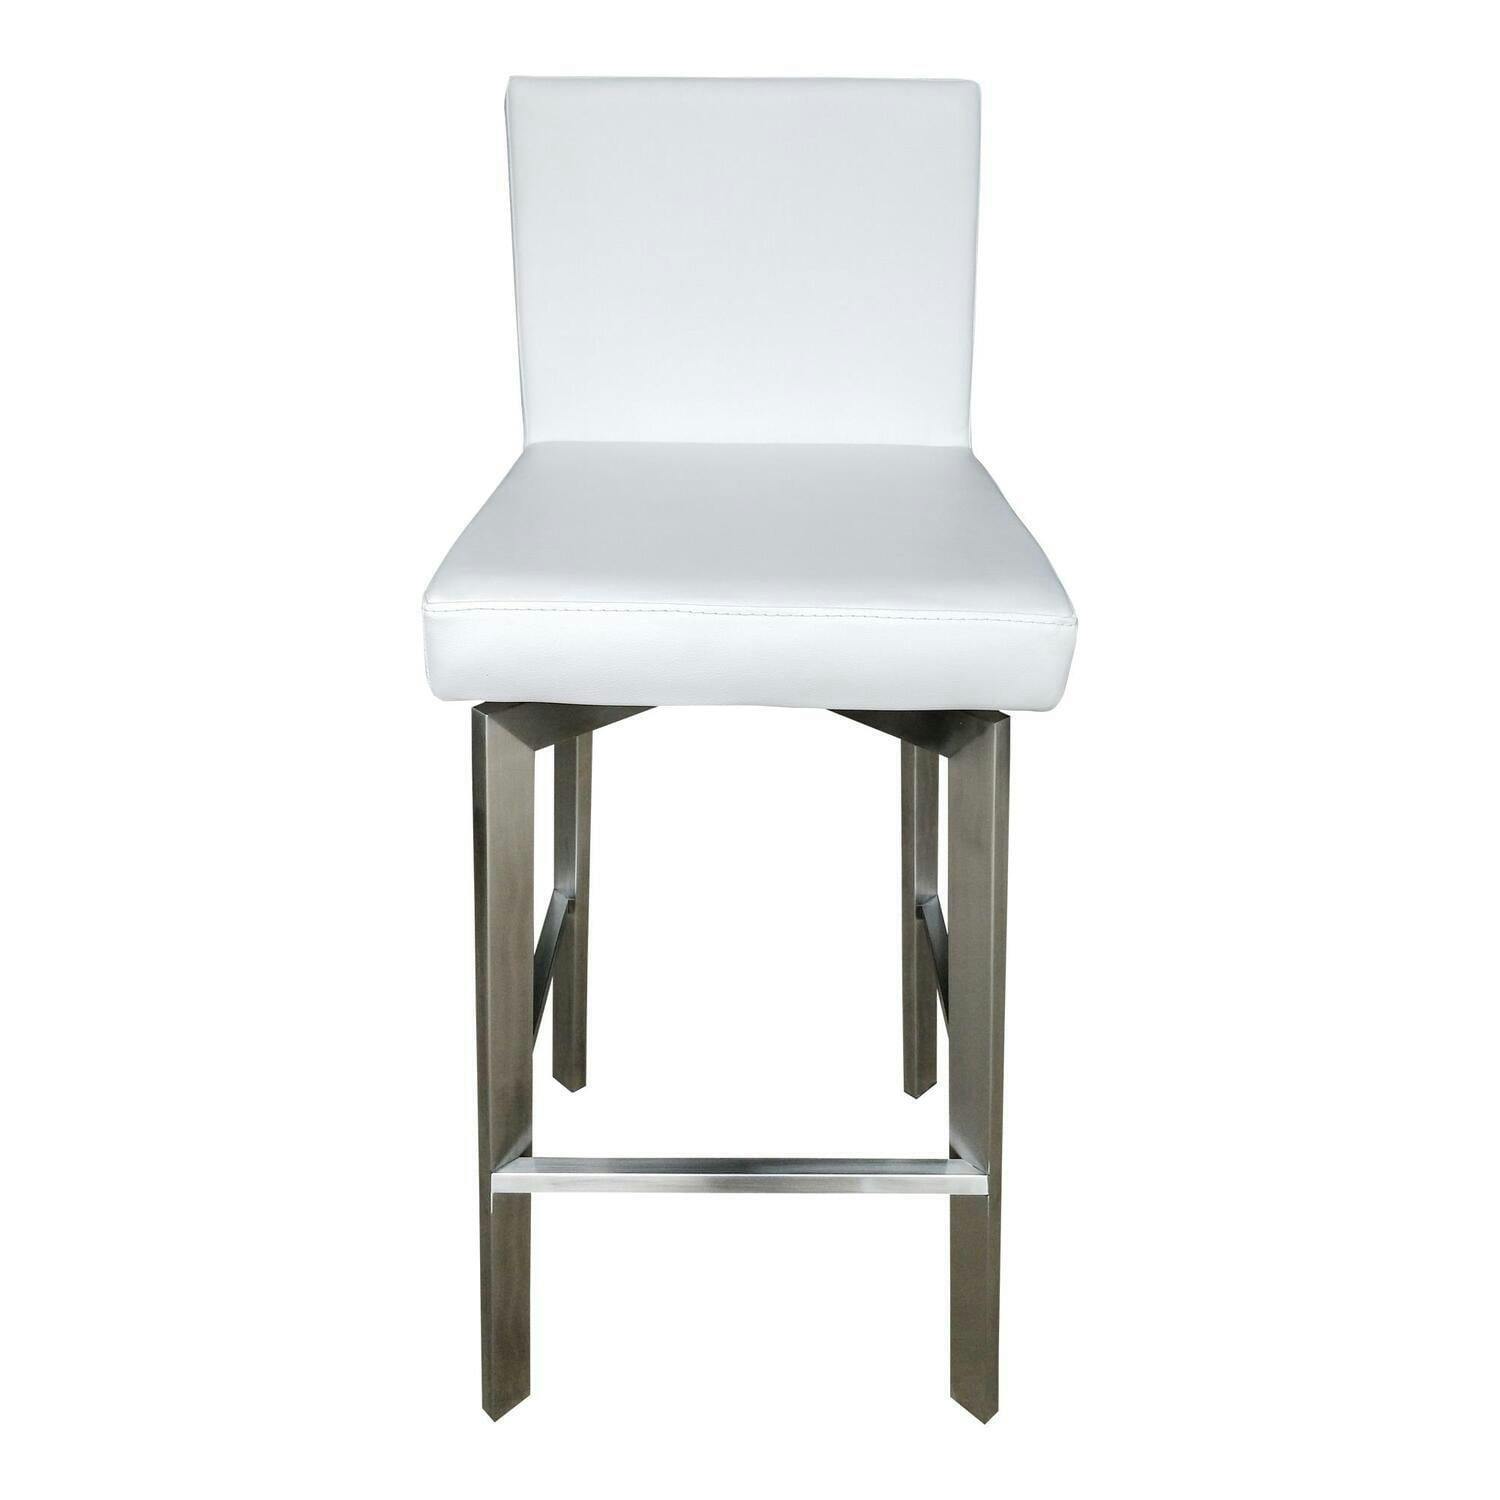 Transitional Swivel Metal and Leather Bar Stool in White